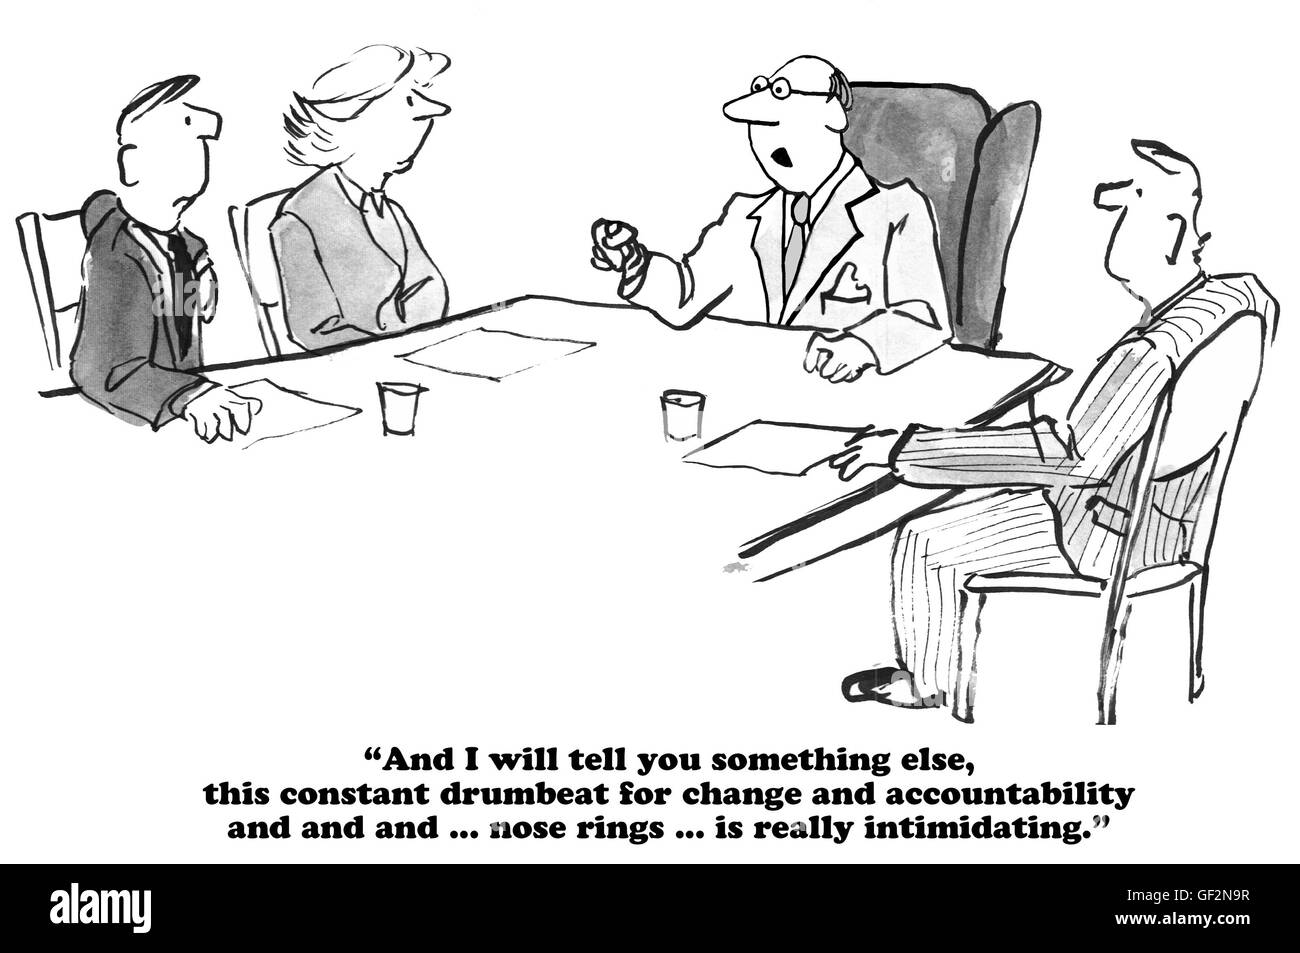 Business cartoon about constant change being intimidating. Stock Photo